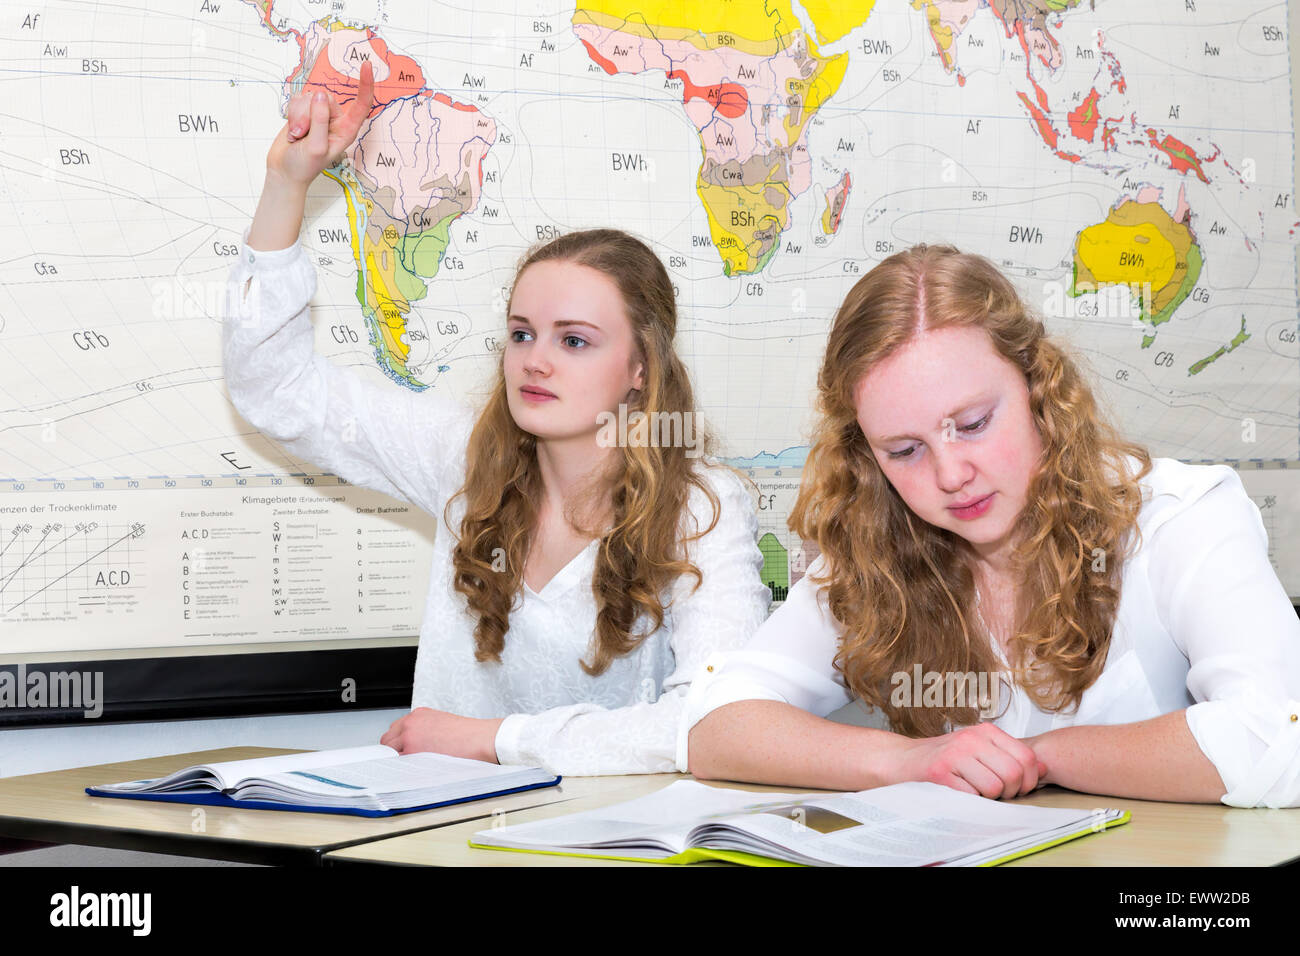 Caucasian teenage girl and student with learn finger in geography lesson in front of wall chart of the world Stock Photo